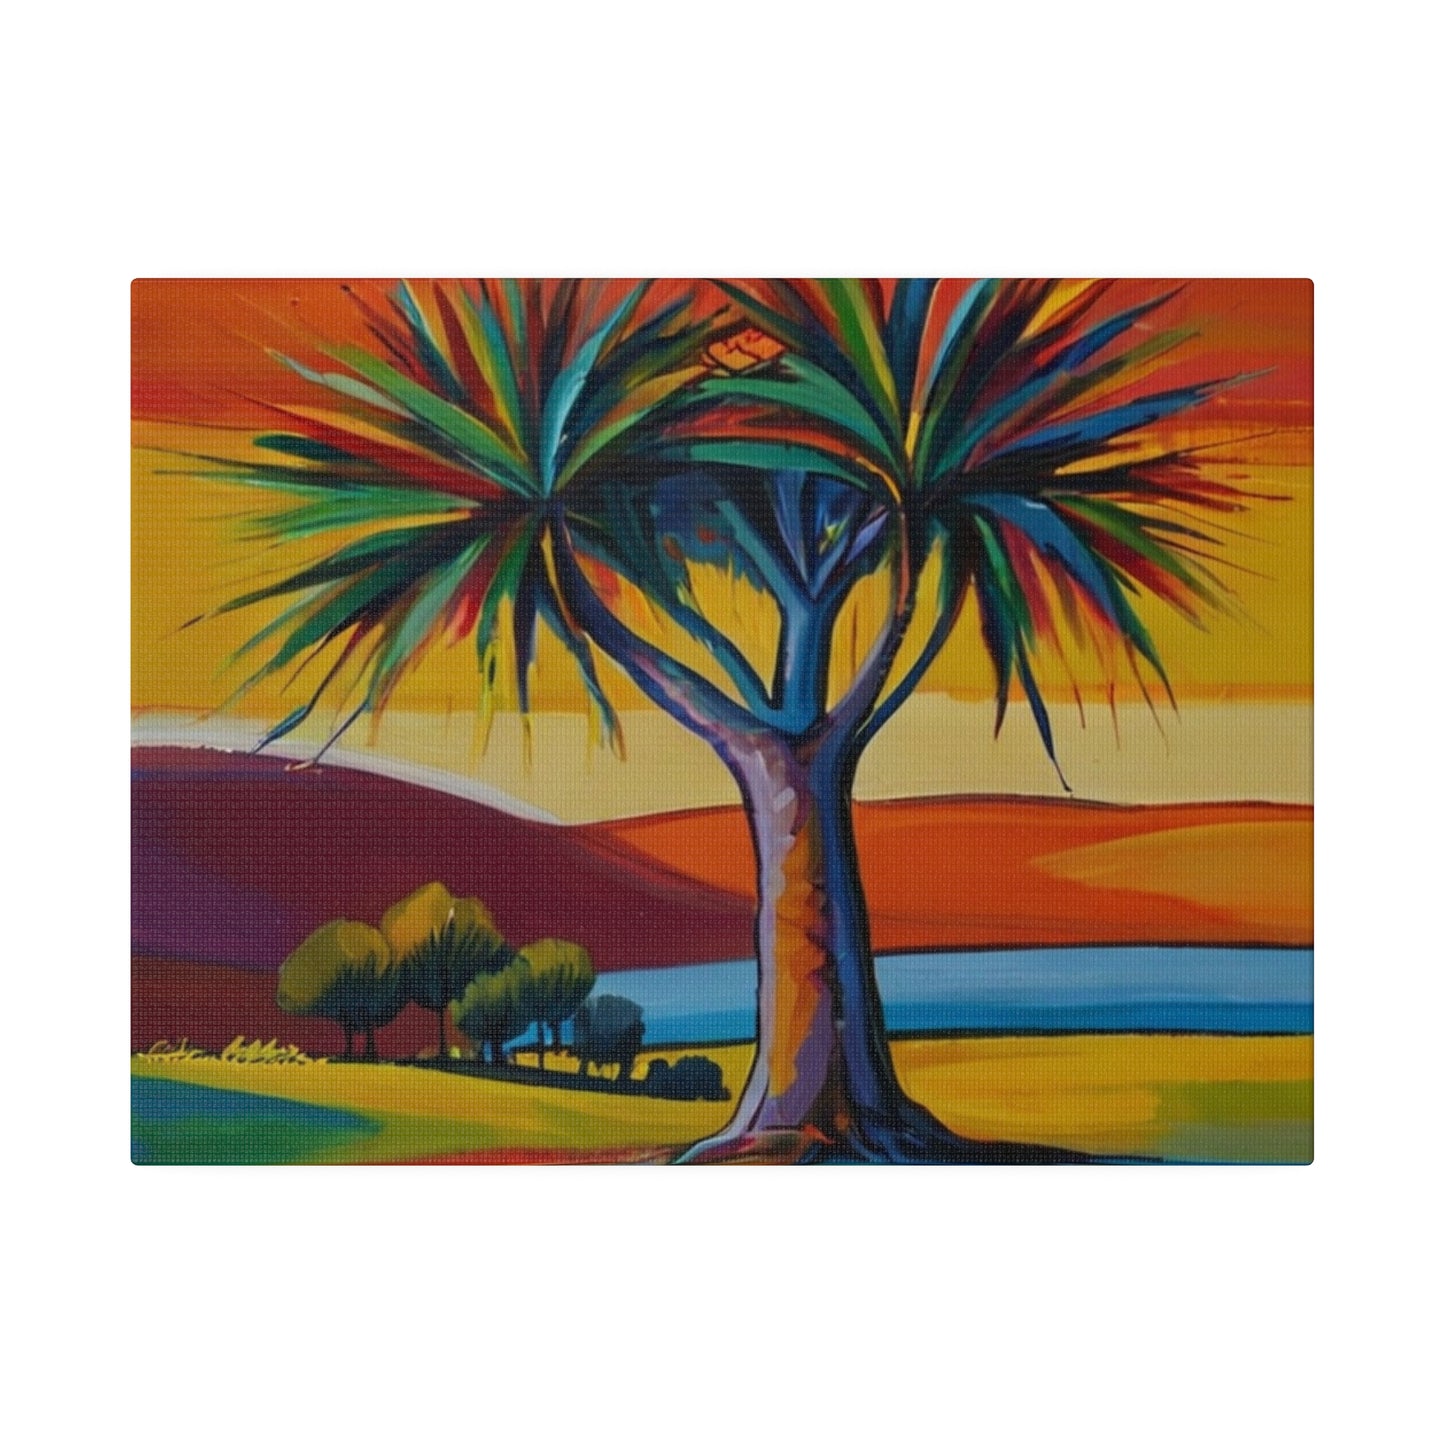 Date Palm Tree Canvas - Matte Canvas, Stretched, 0.75"